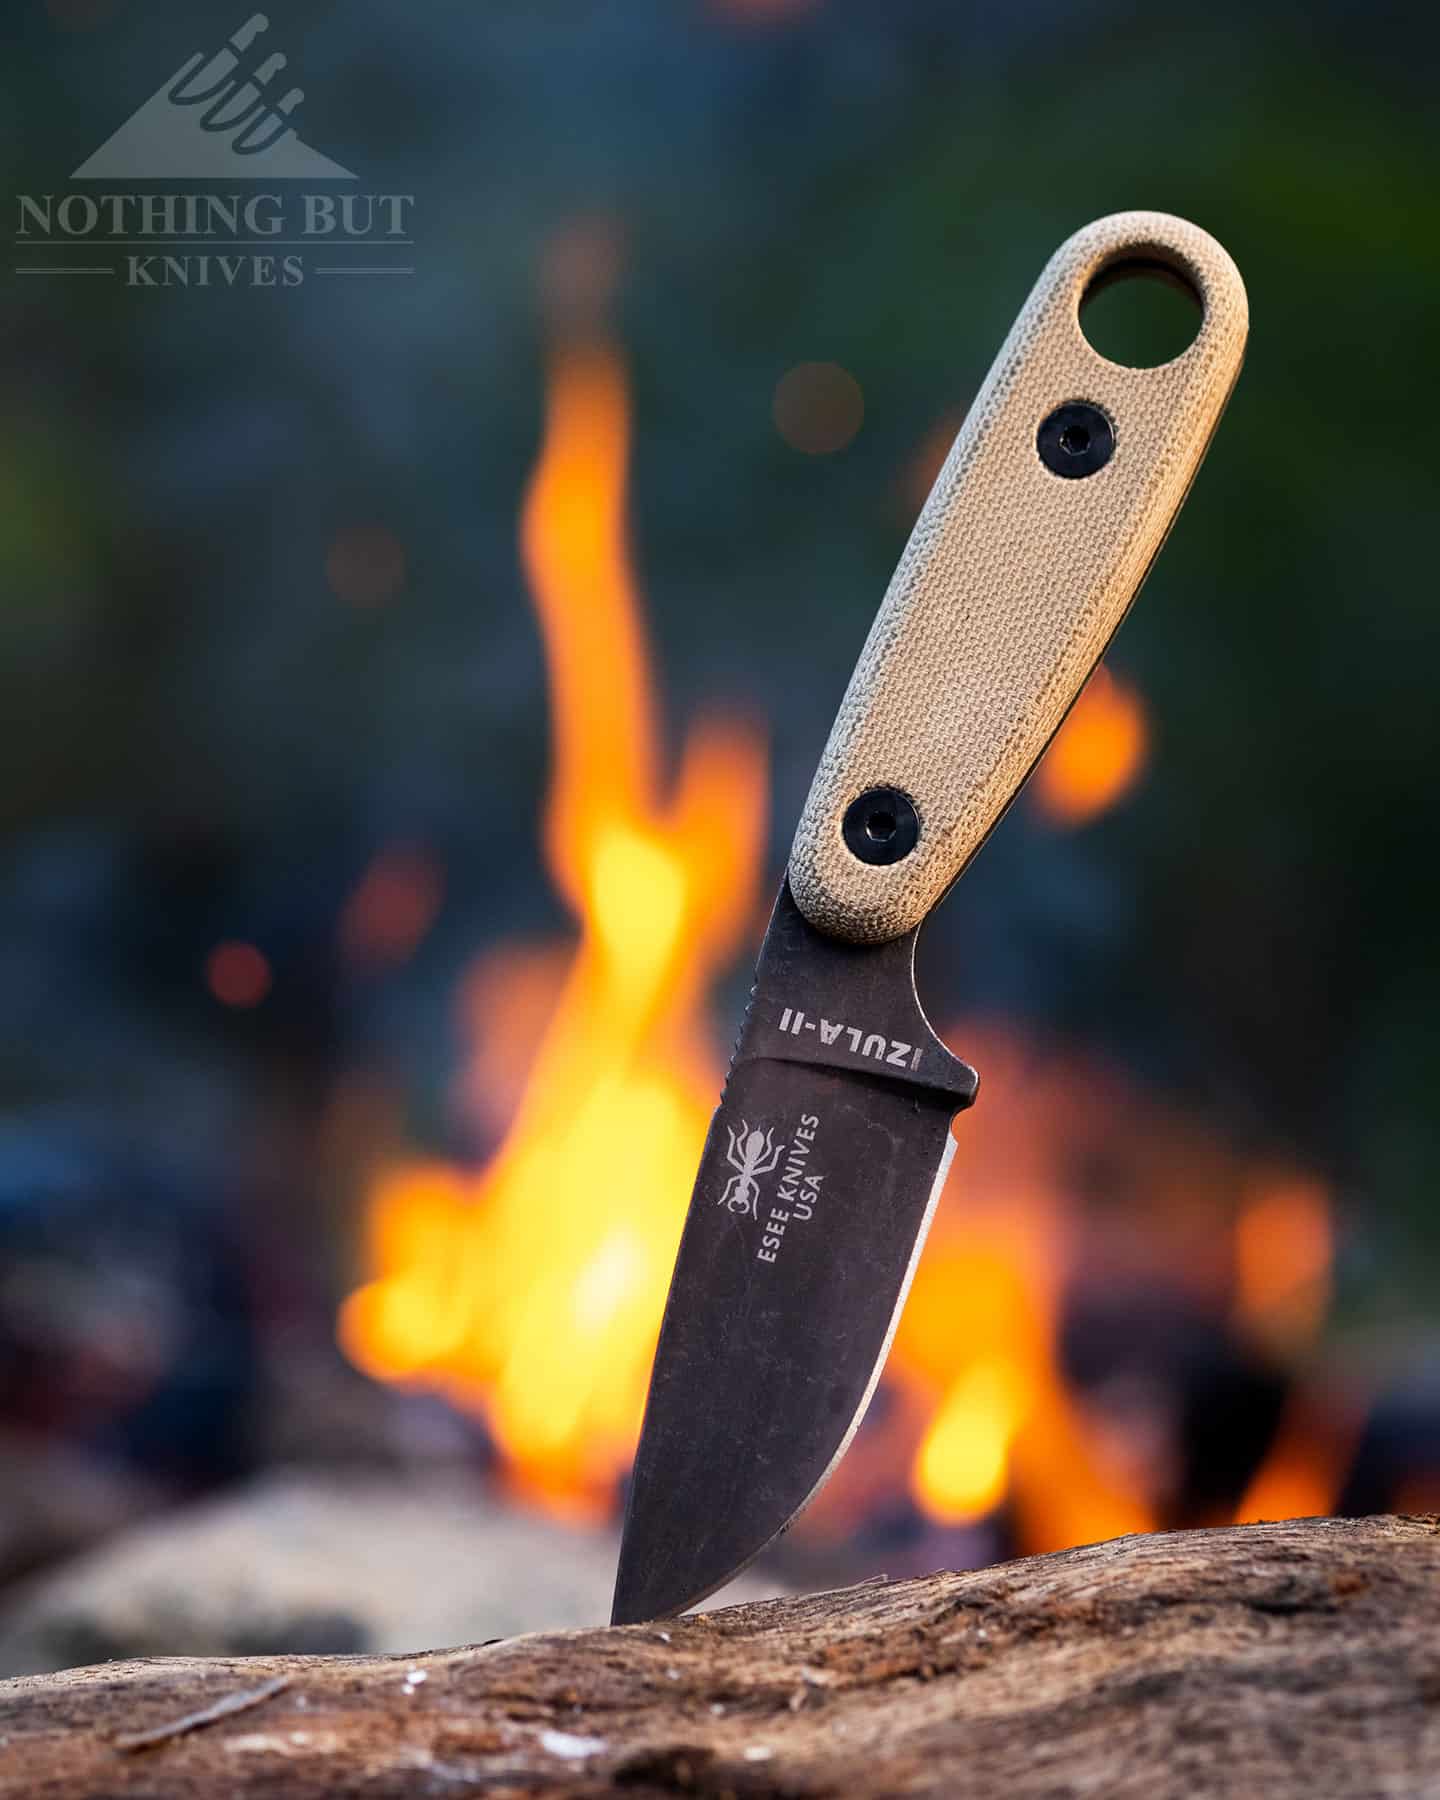 The Esee Izula 2 is a popular survival knife in part due to the fact that its sheath is versatile.